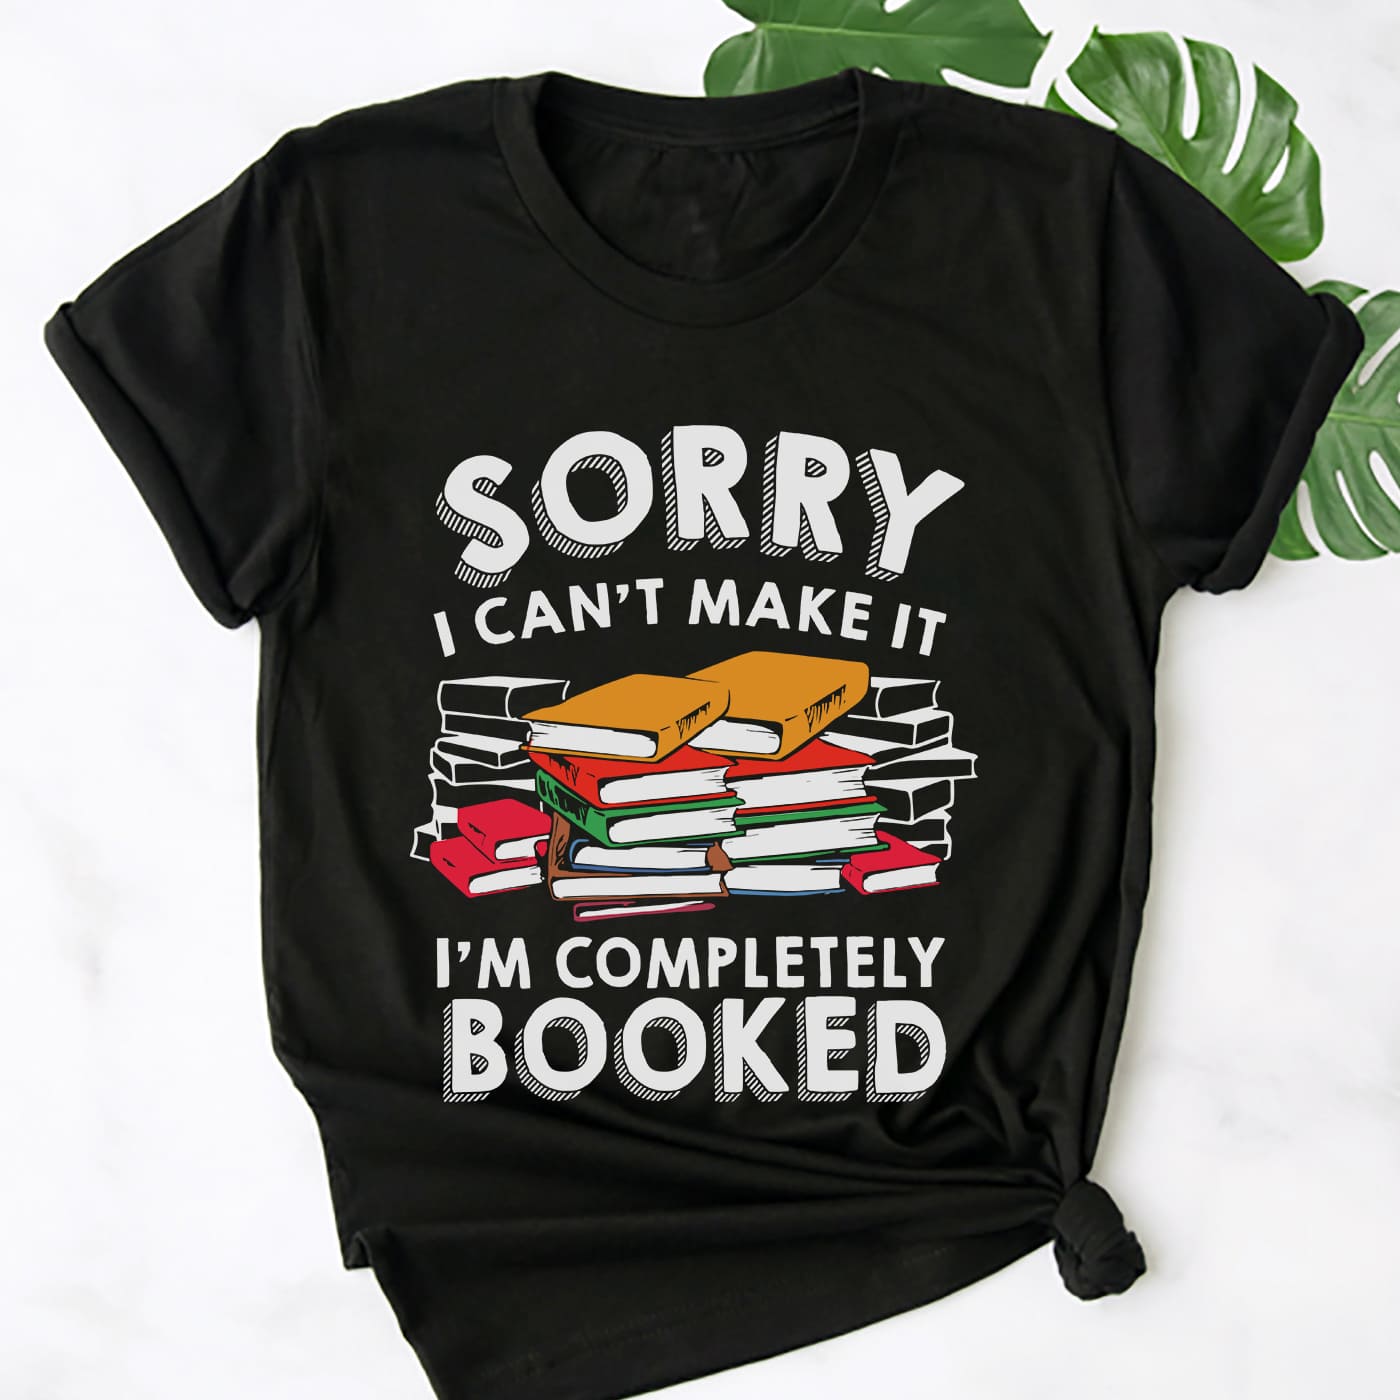 Sorry I can't make it I'm completely booked - Gift for book lover, reading book hobby